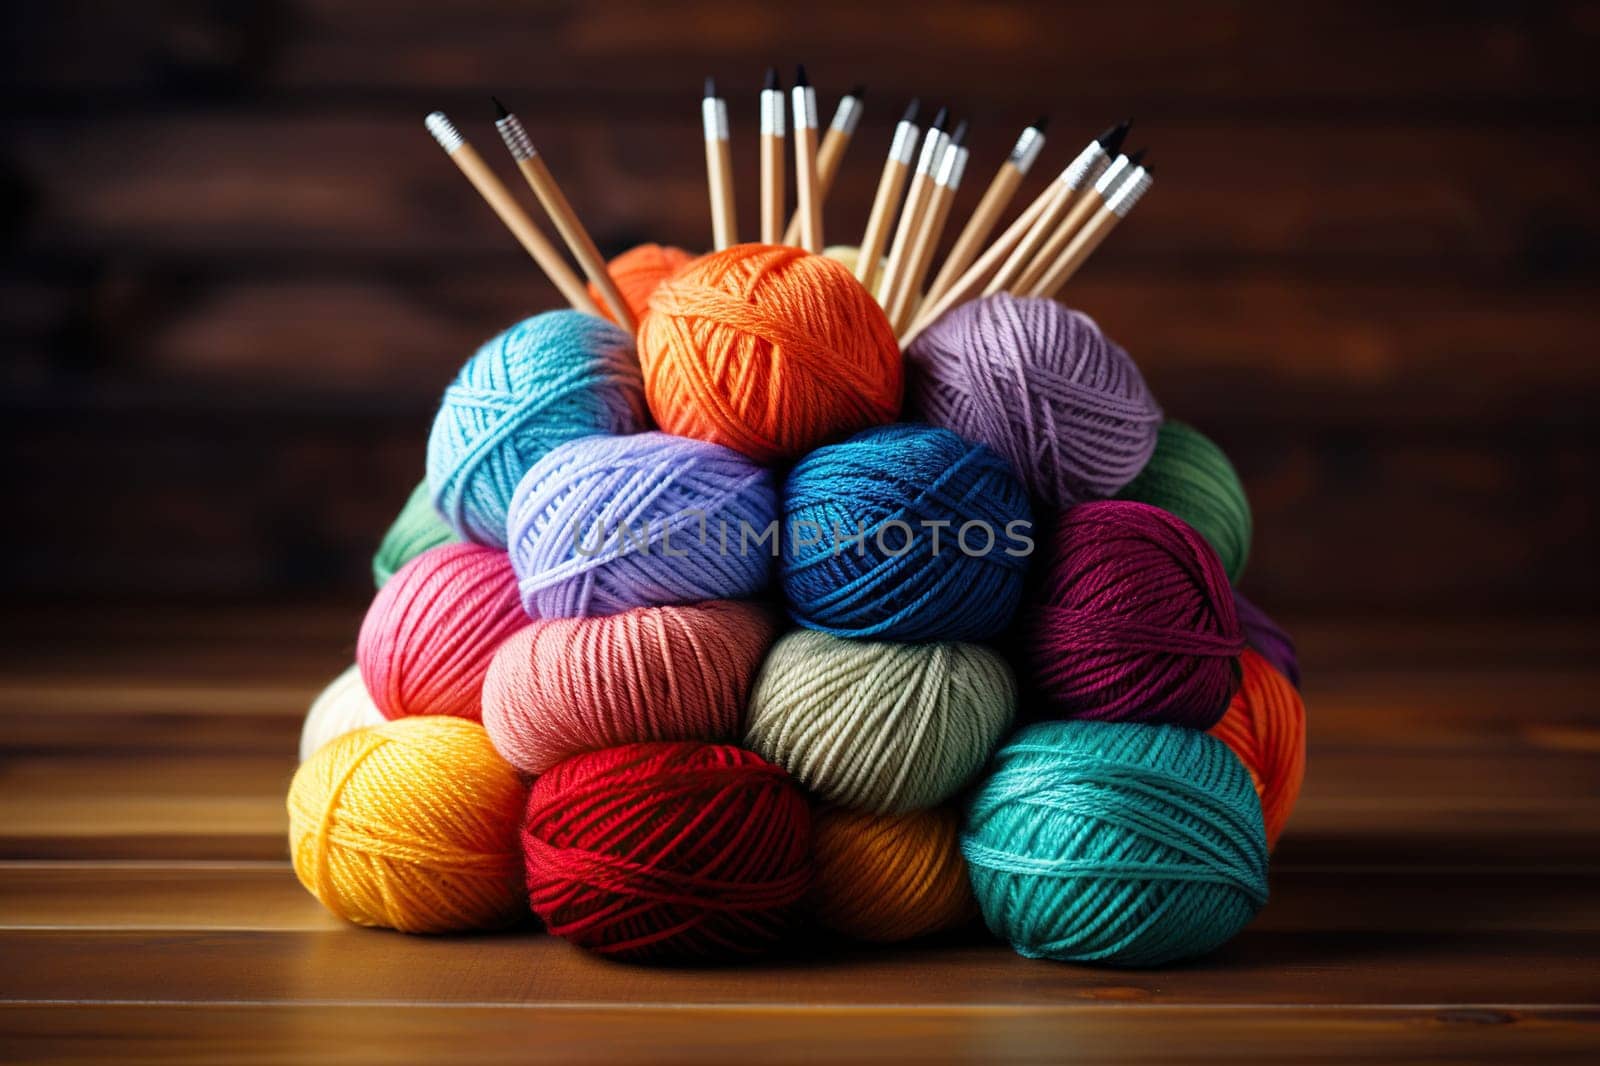 A large stack of balls of yarn with knitting needles on a wooden table.